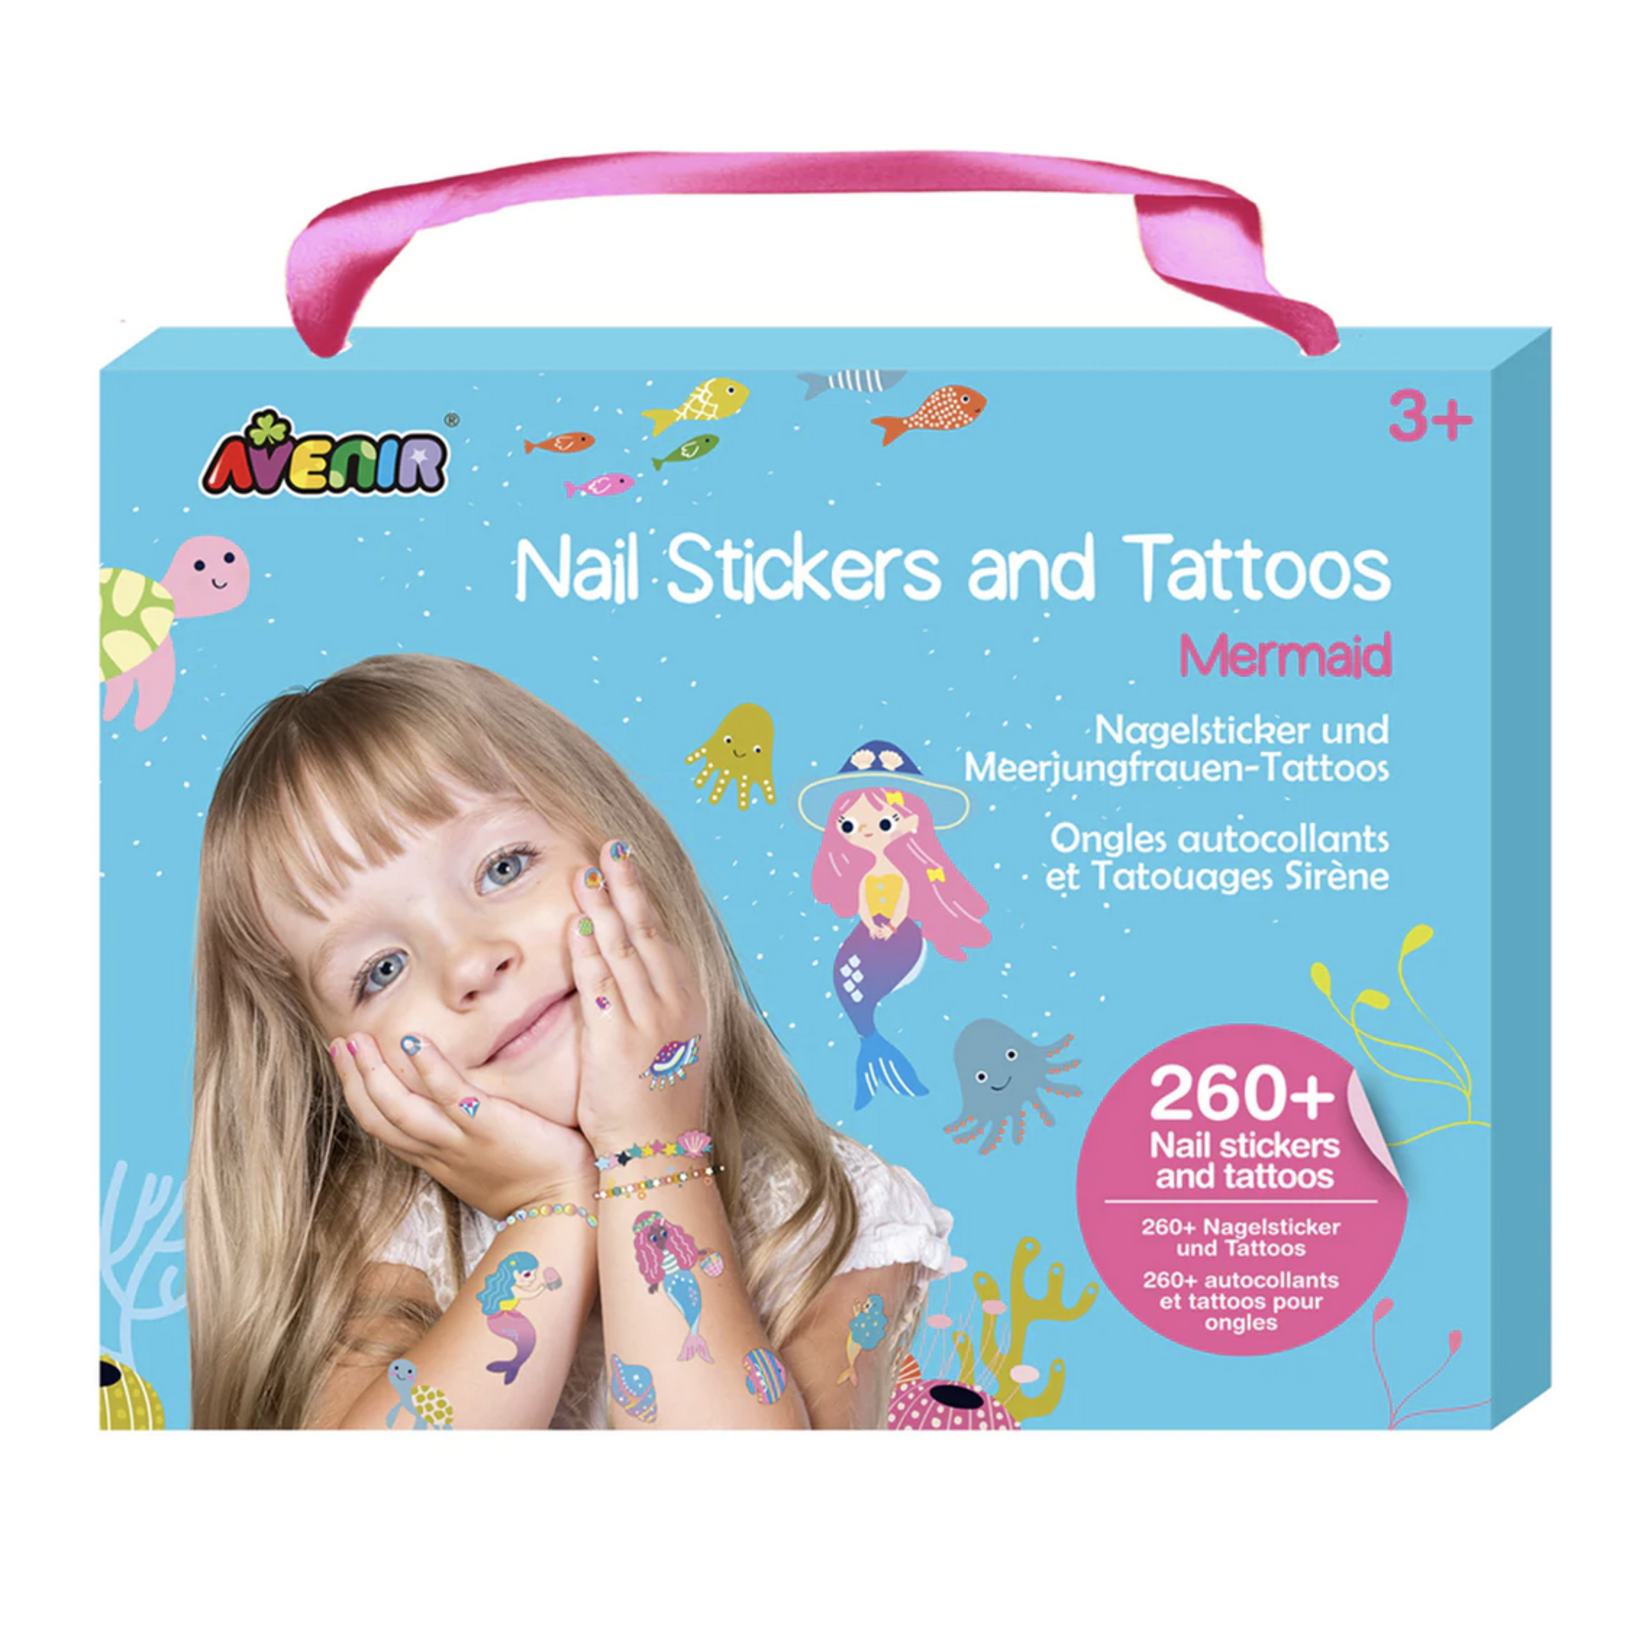 Mermaid Nail Stickers and Tattoos